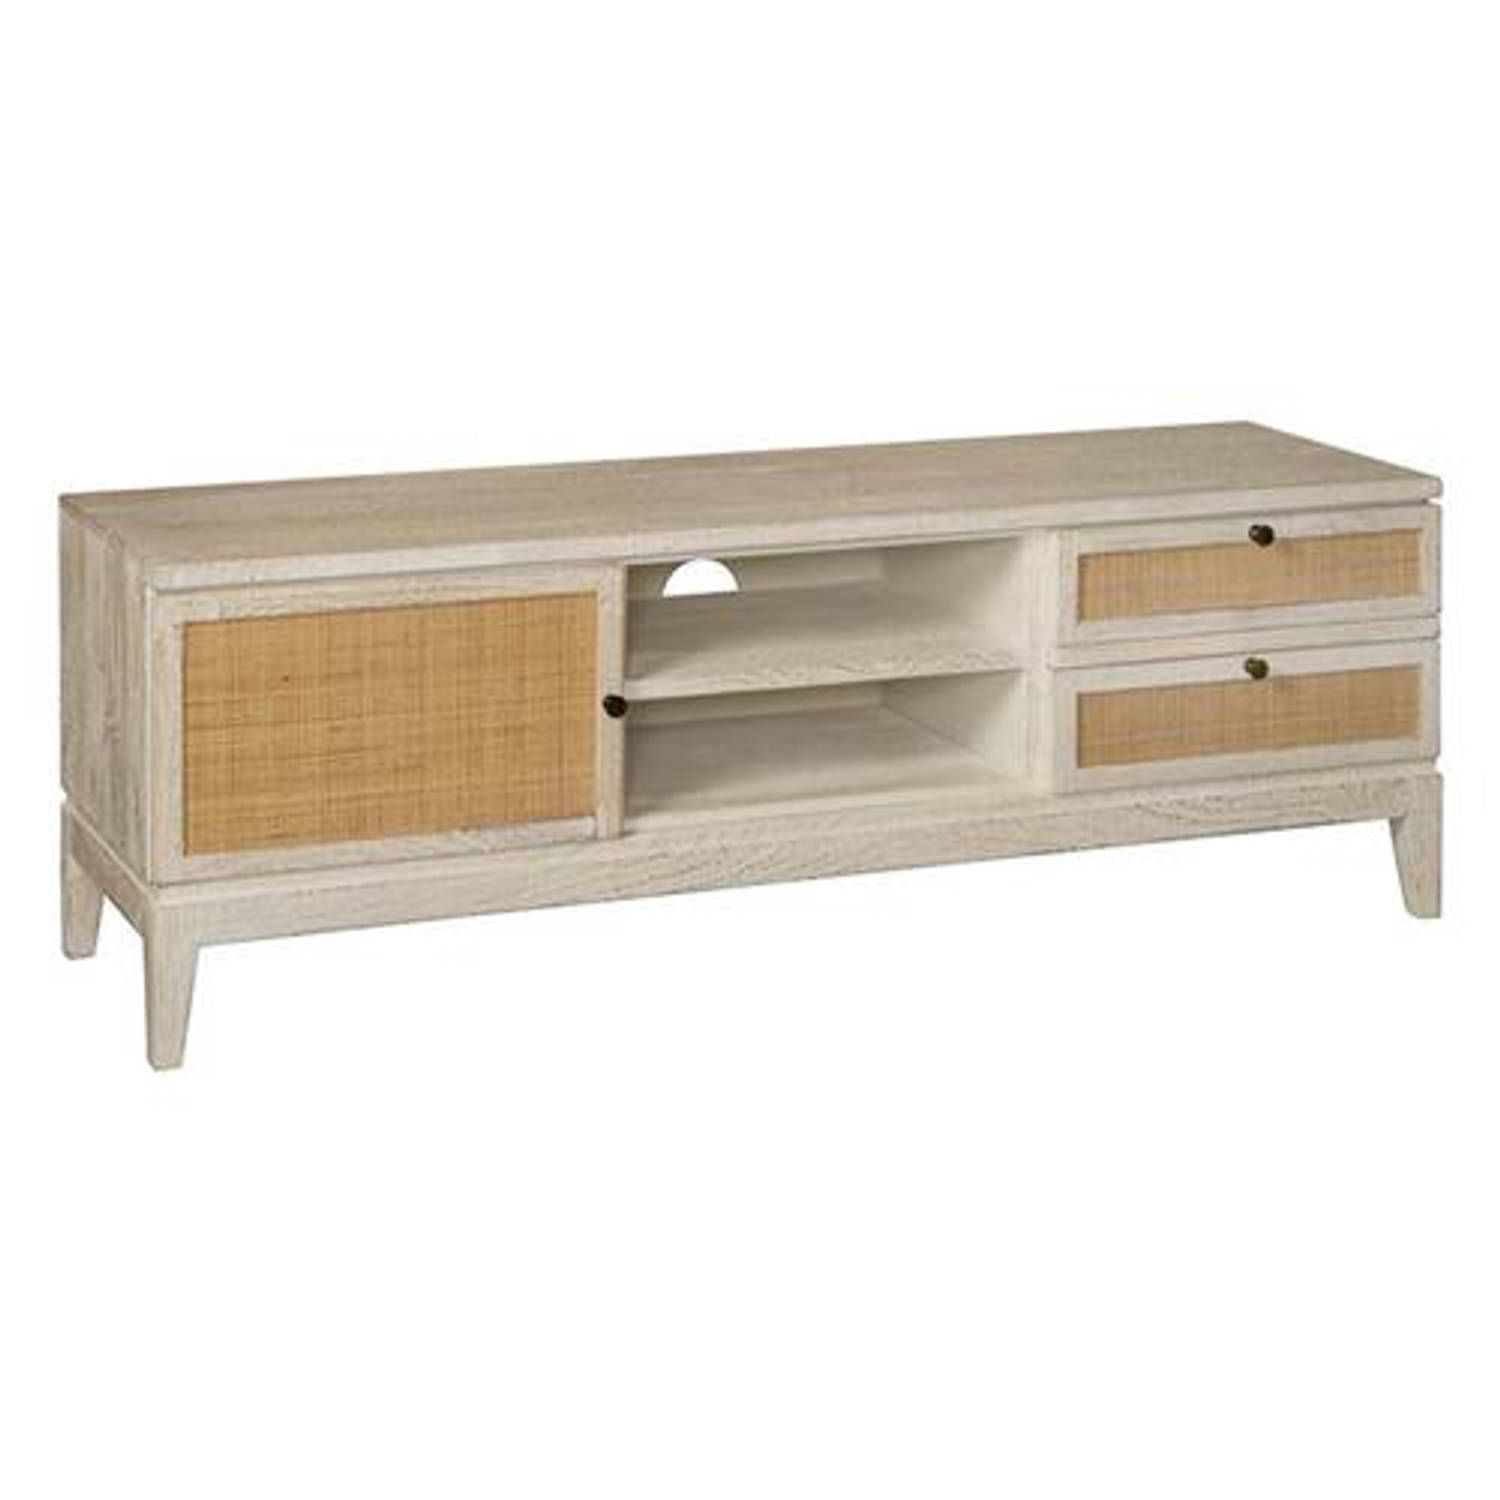 TOFF Vincenza TV stand 160x45x55